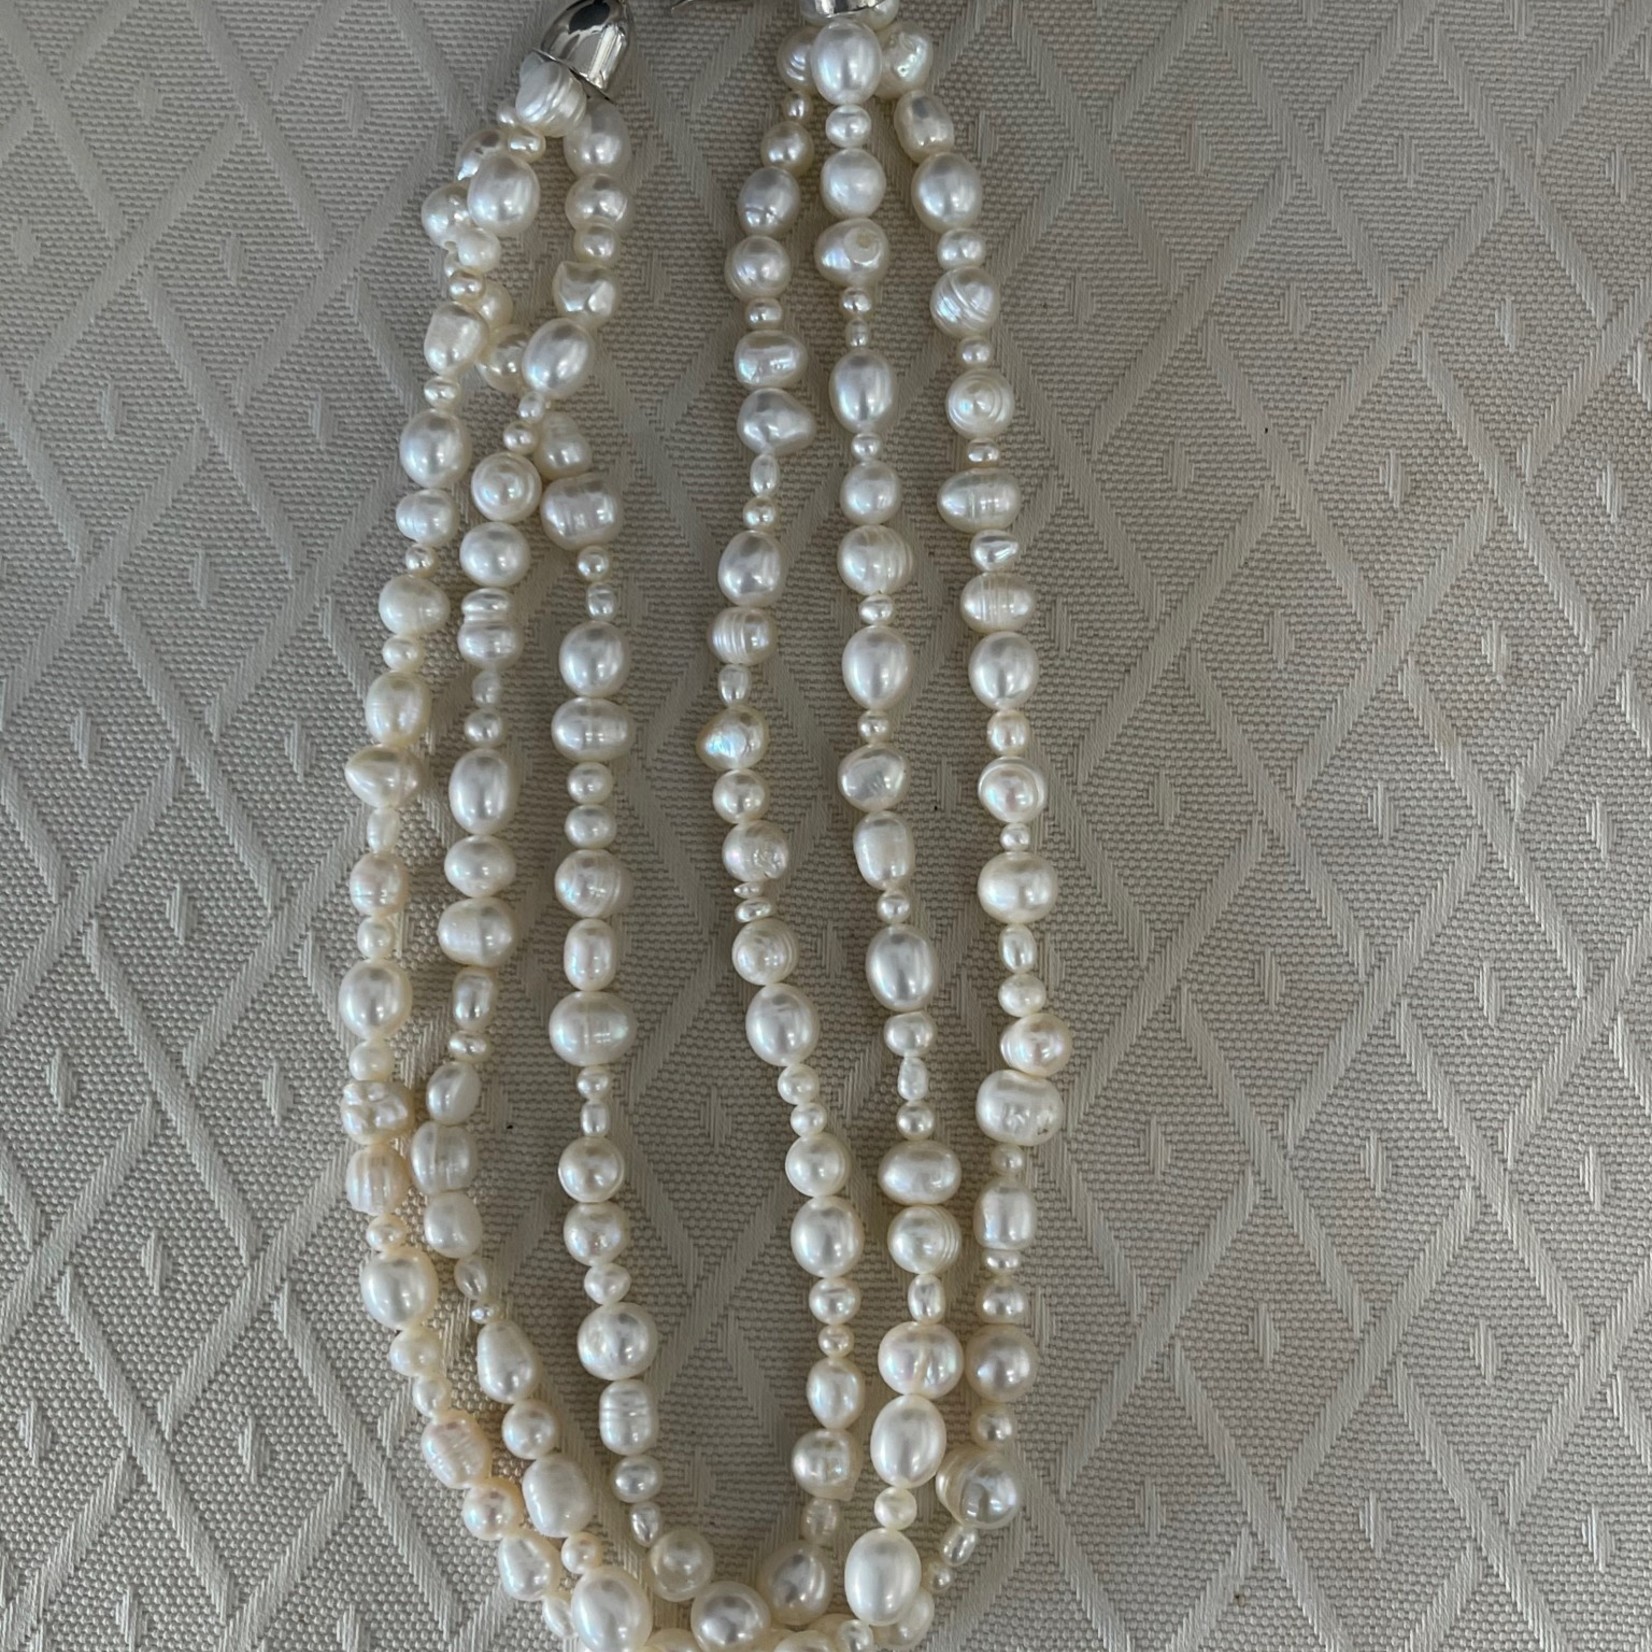 Rare Finds NECKLACE, White Pearls, sterling, 16", 3-strand, RARE